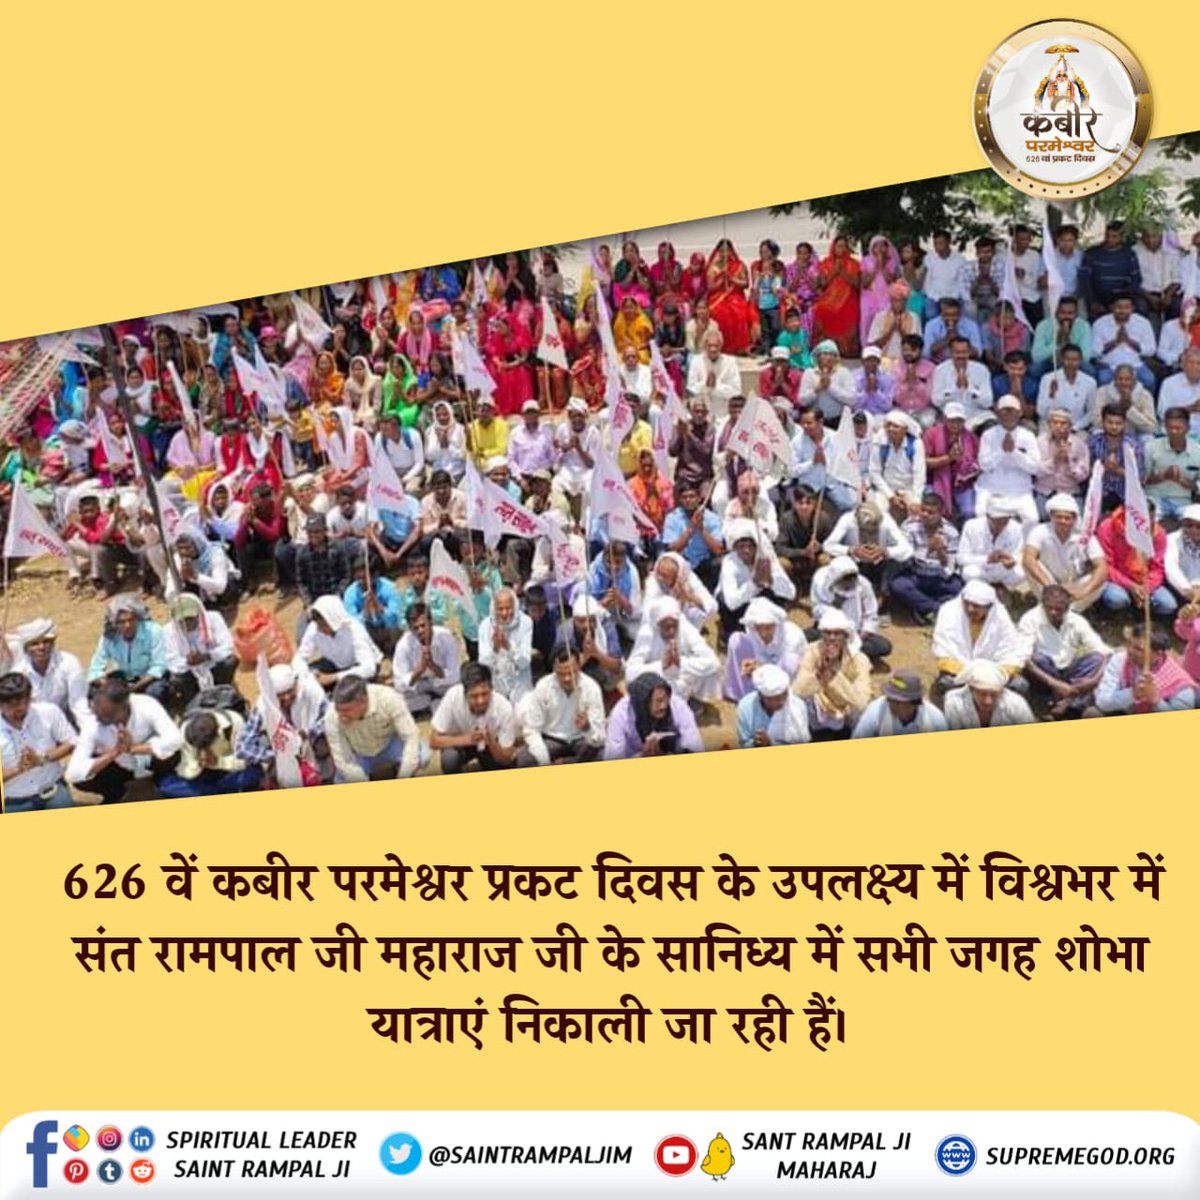 #GodMorningTuesday
#Satguru_Shobha_Yatra
2nd, 3rd, 4th June 2023 is the manifest day of Supreme God Kabir, on the occasion of which a procession is being taken out in every small town, city and village to end all the evils spreading in the human society.
God Kabir Prakat Diwas